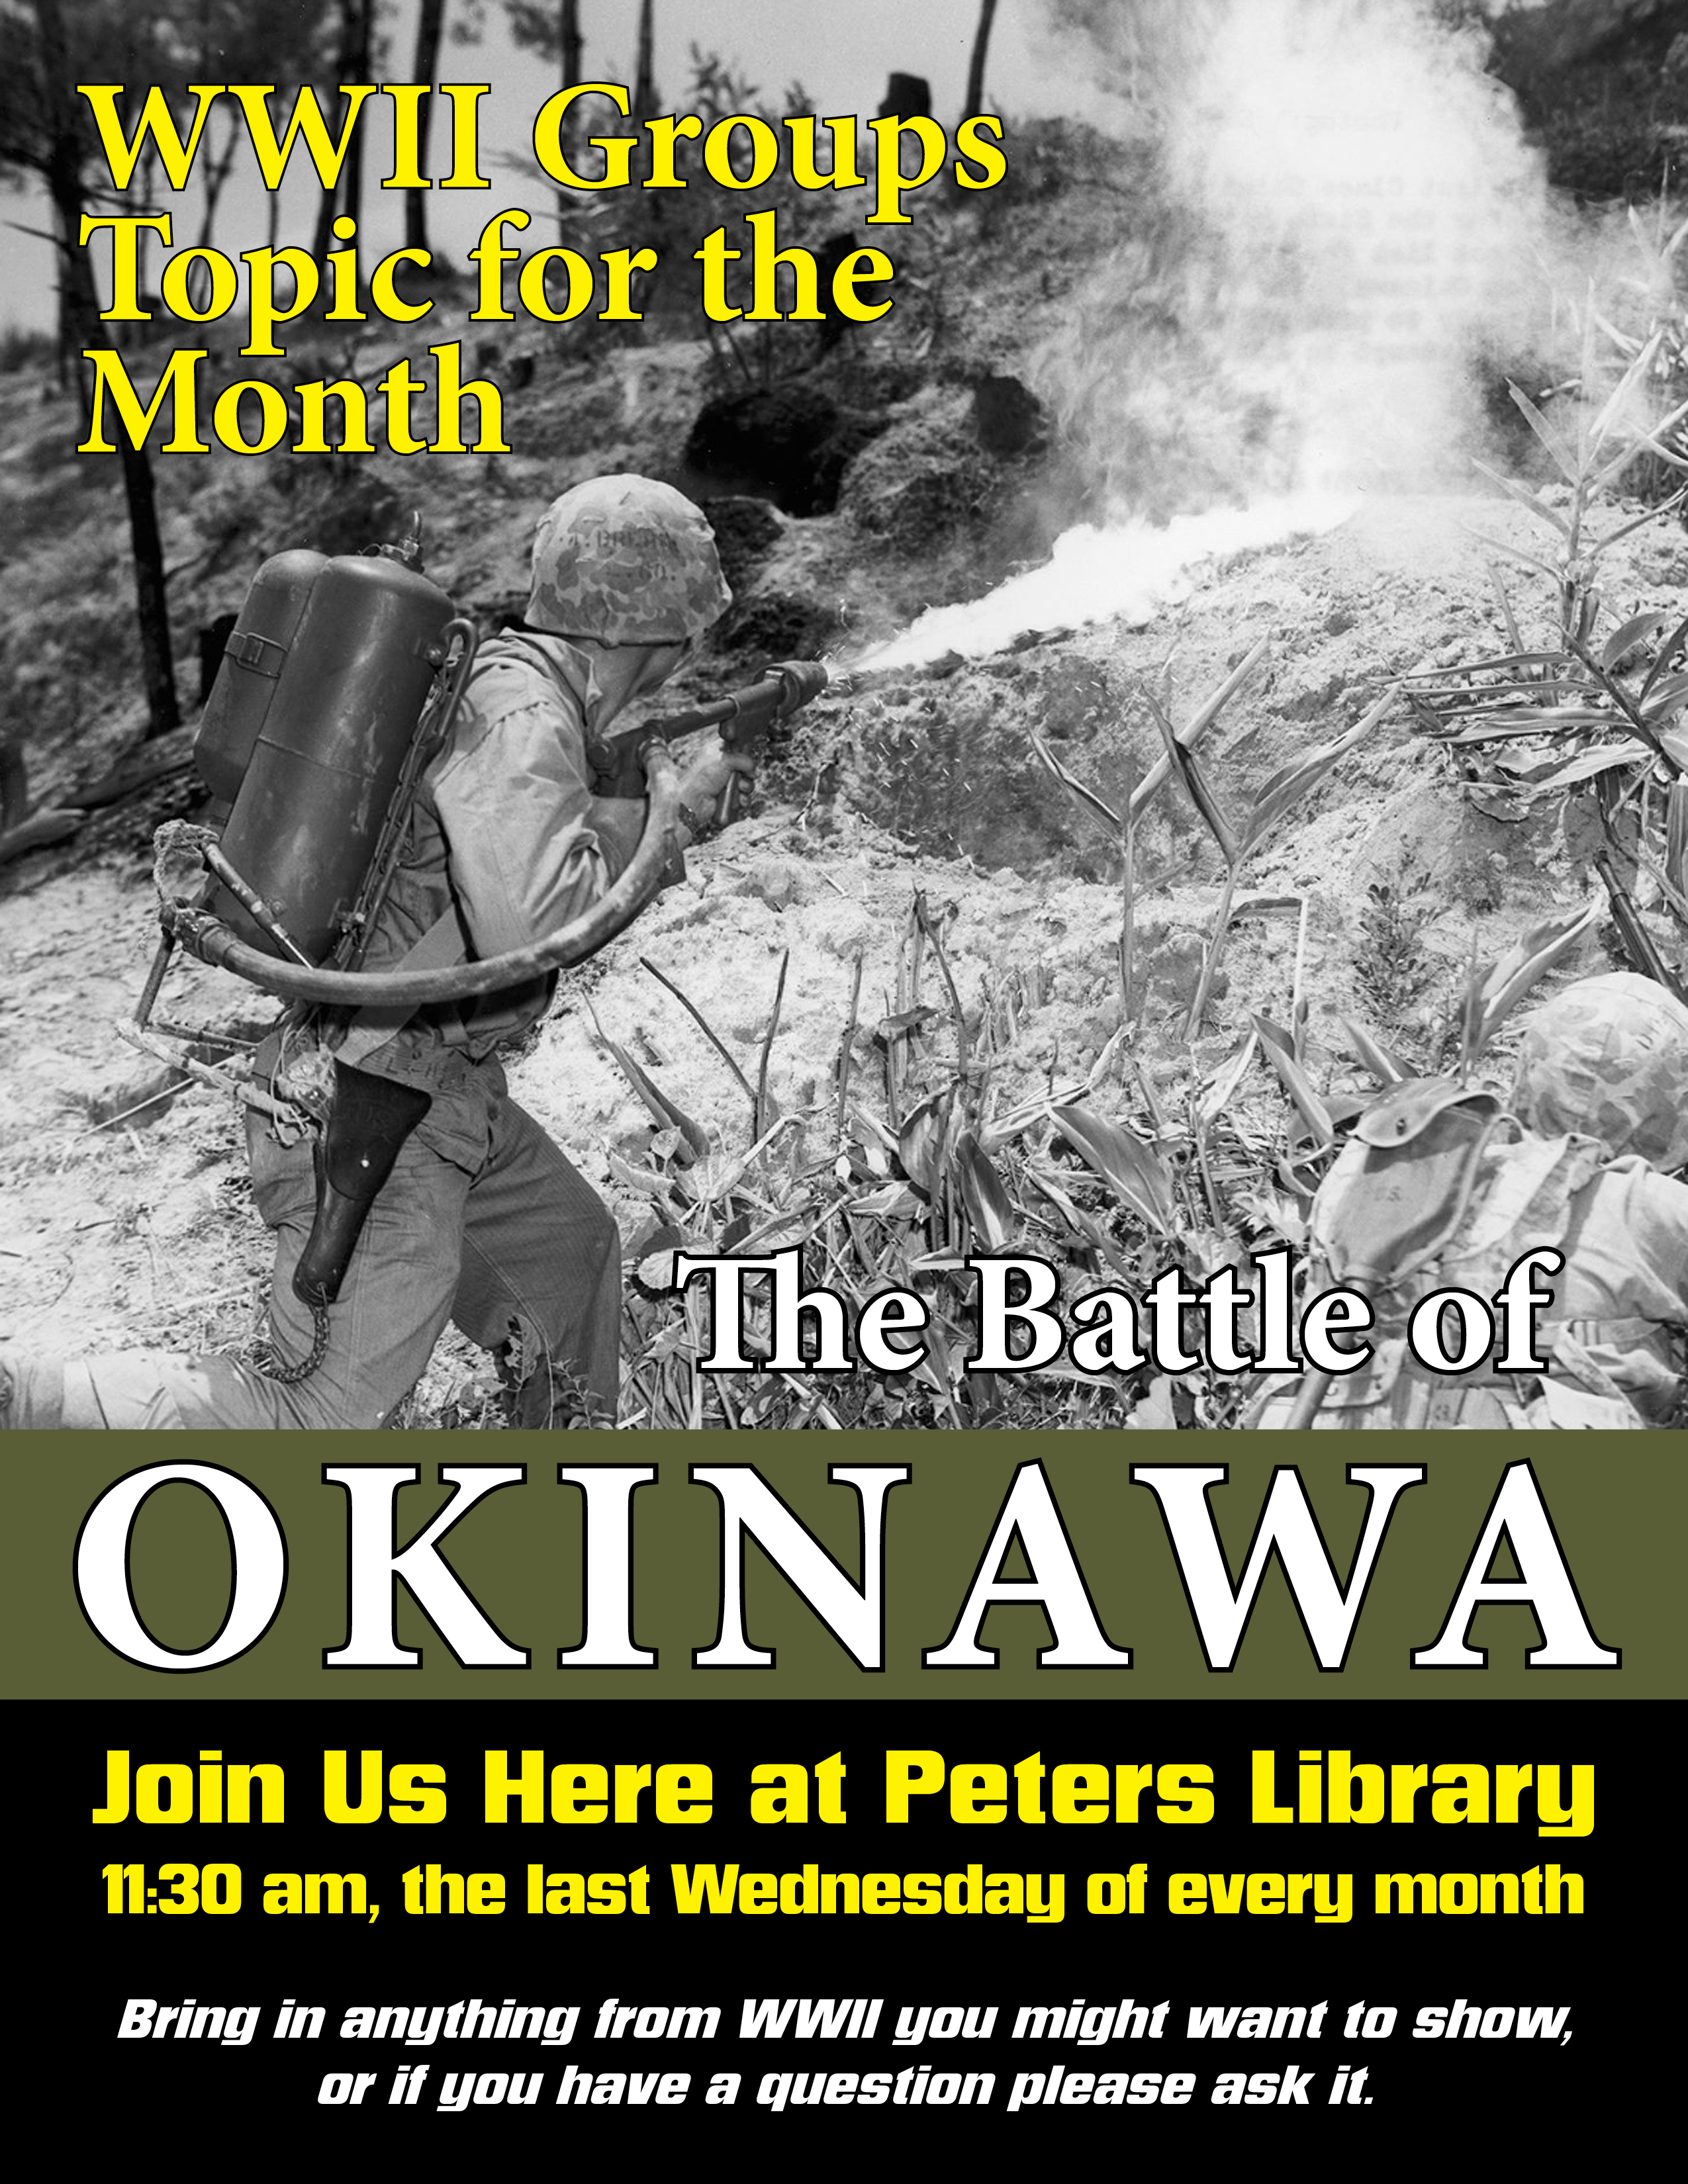 WWII Discussion Group Everybody Welcome October's Topic: The Battle of Okinawa - image of service member with flame thrower